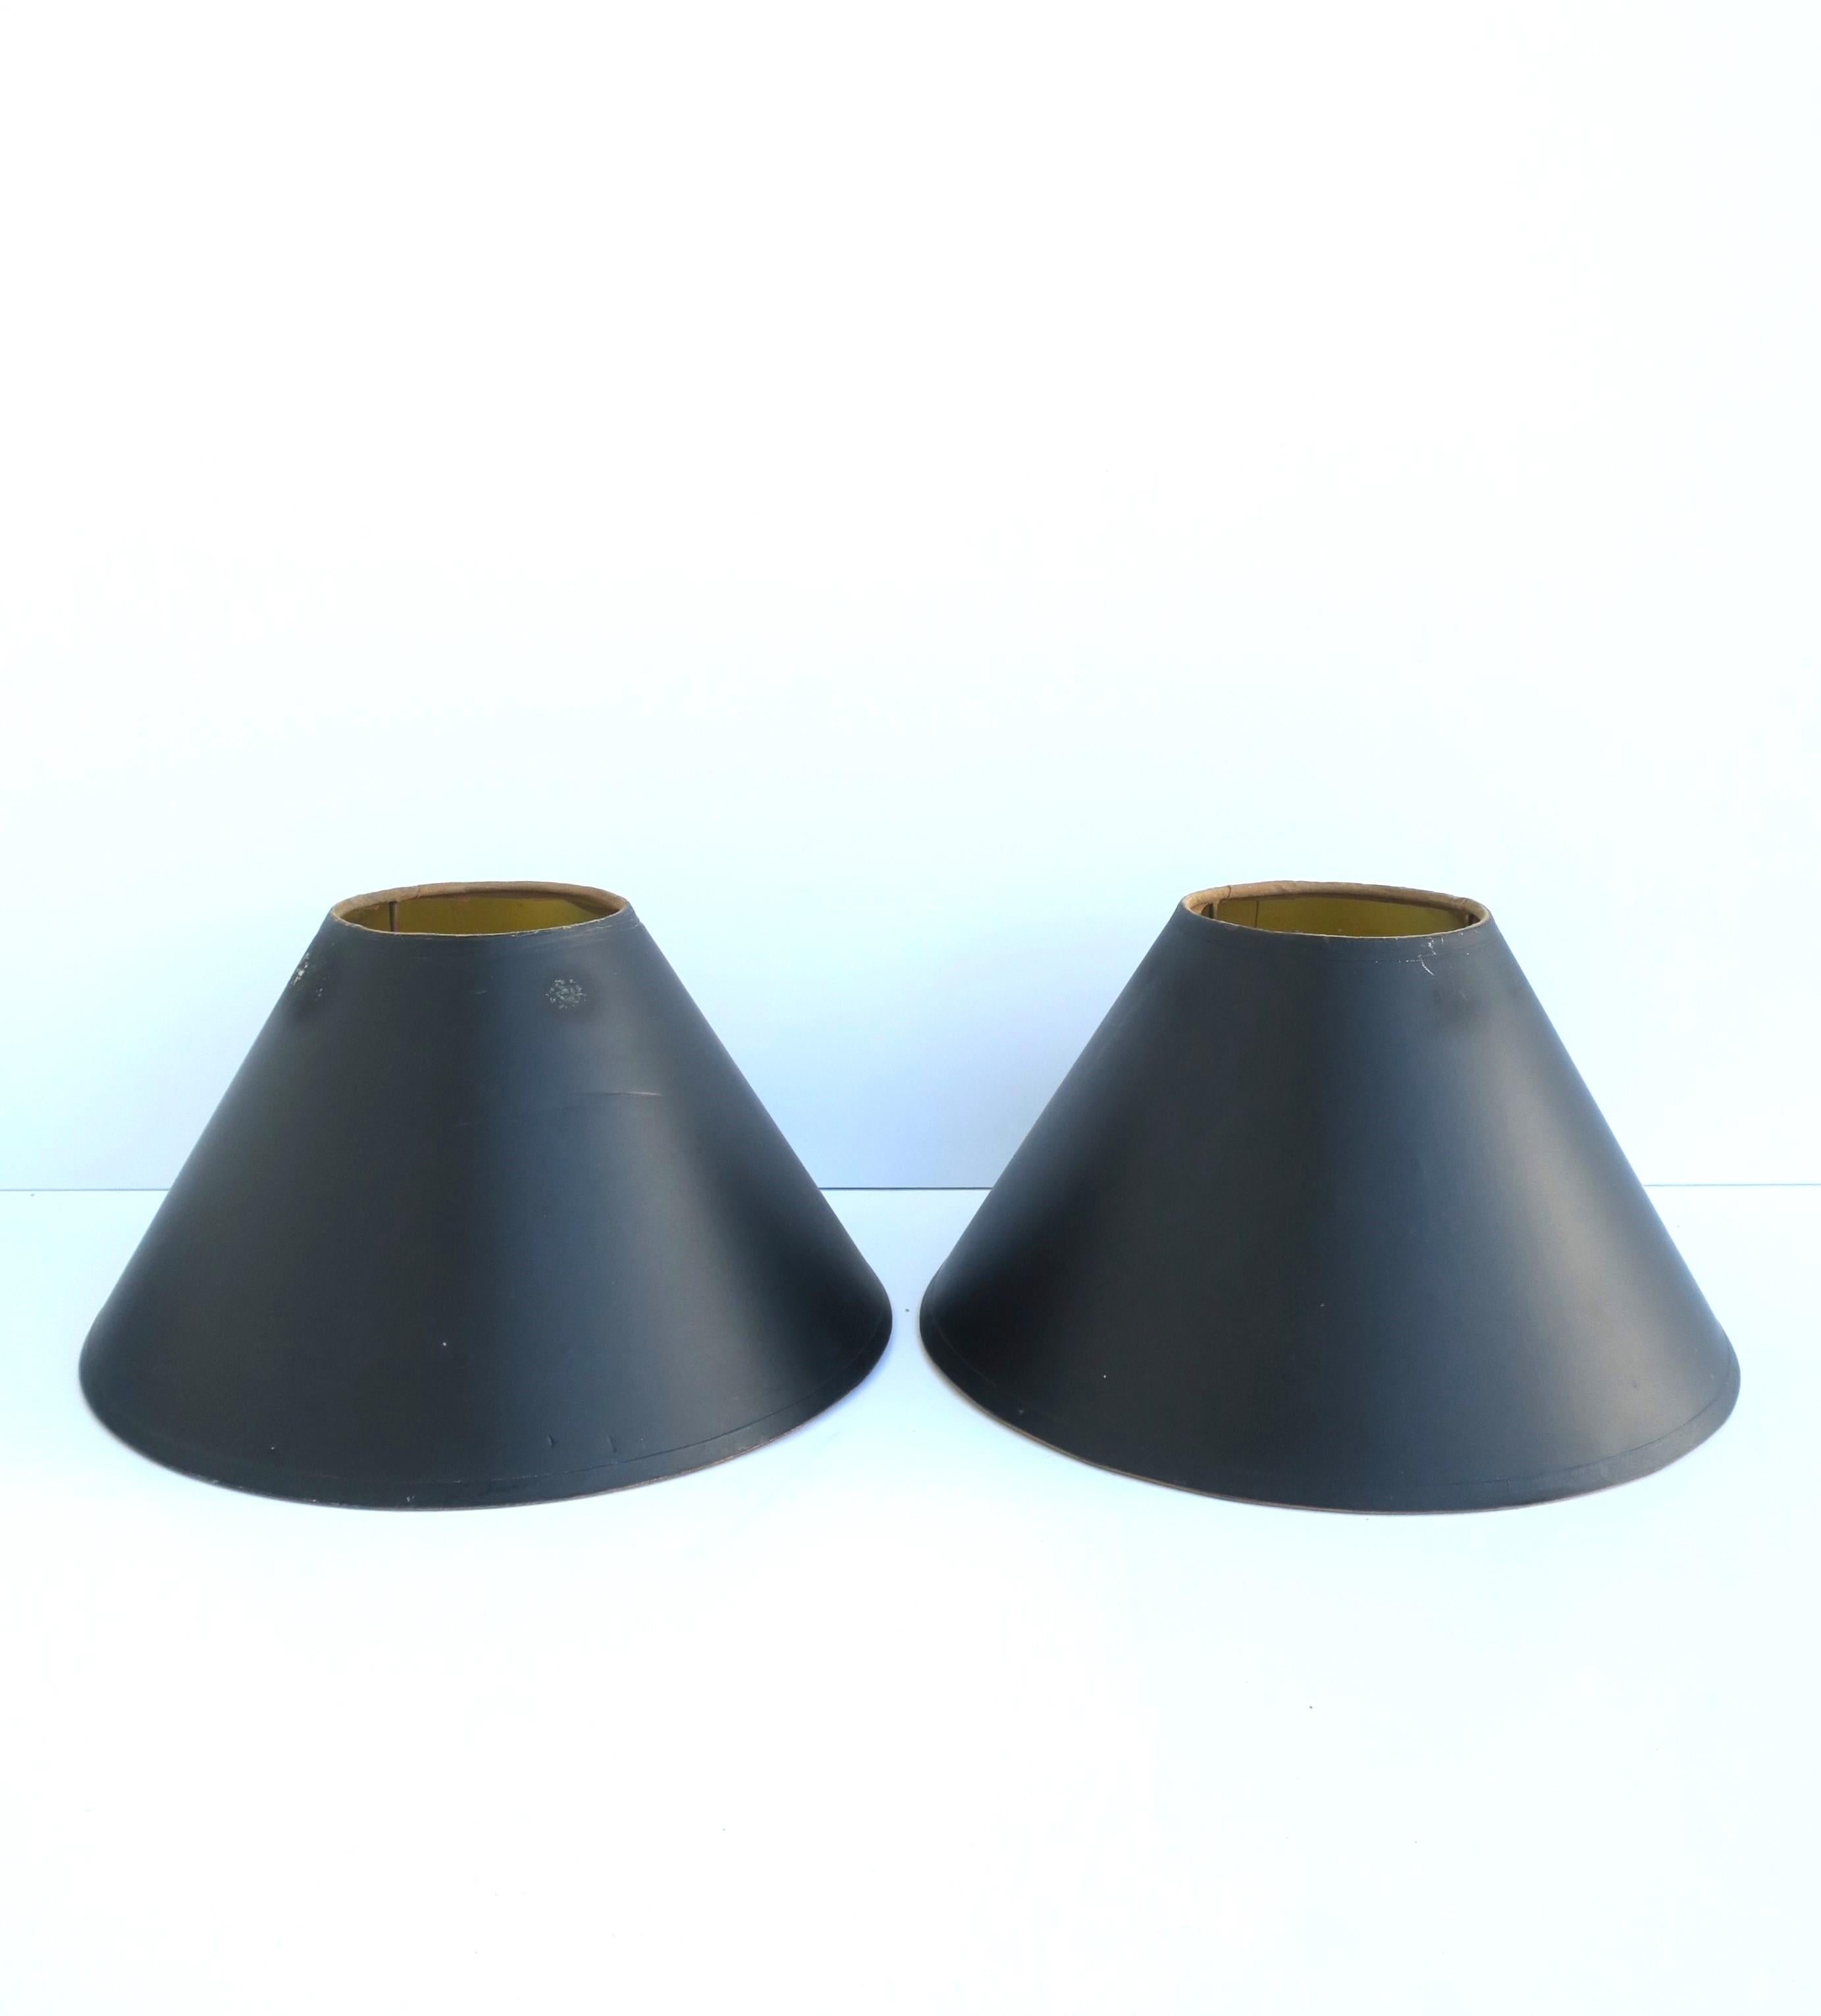 A pair of relatively small black paper lampshades [lamp shades] with gold interior and brass hardware. Dimensions: 11.25